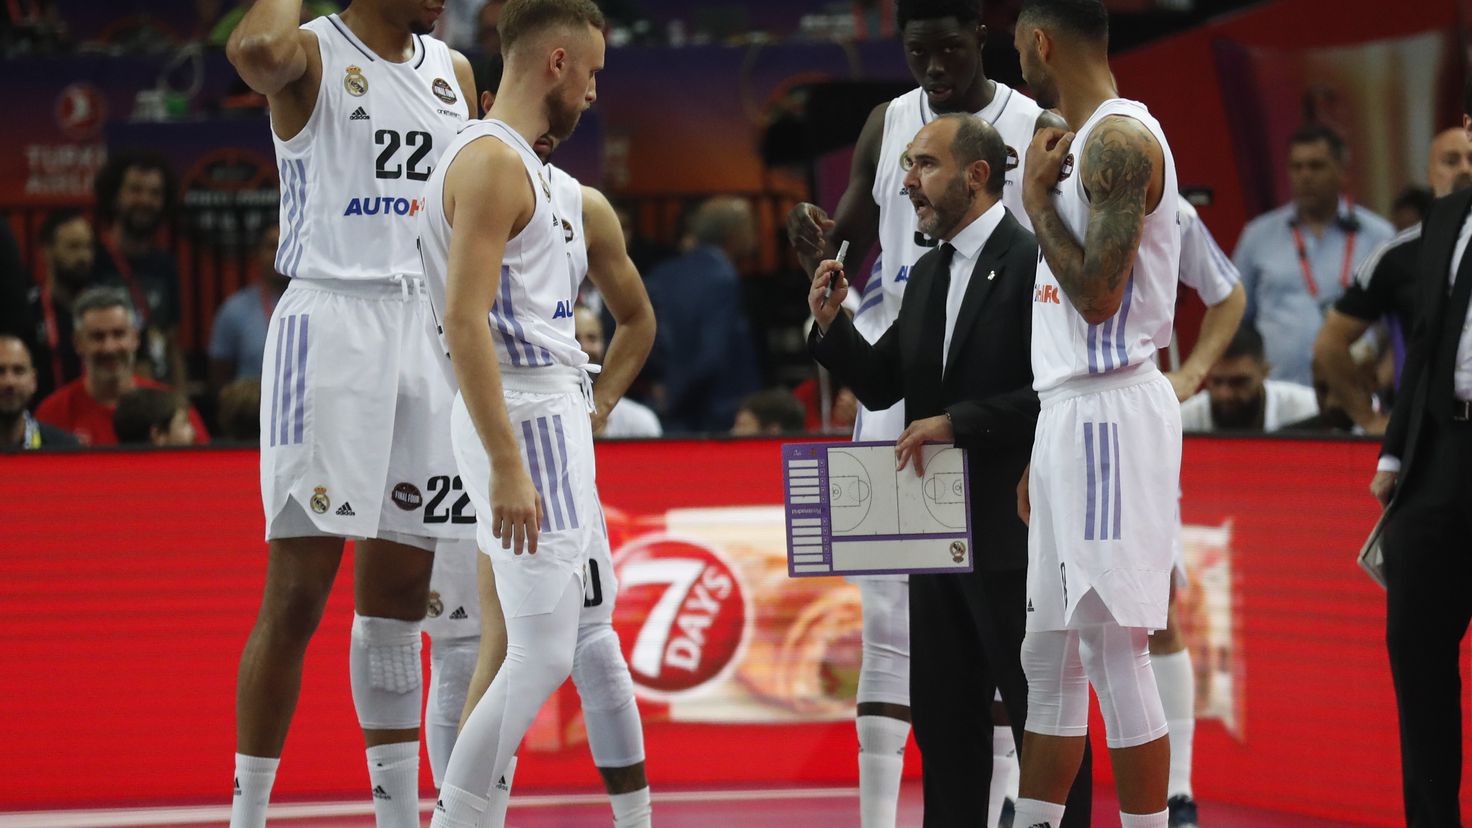 How much prize money does Madrid take for winning the Euroleague?
